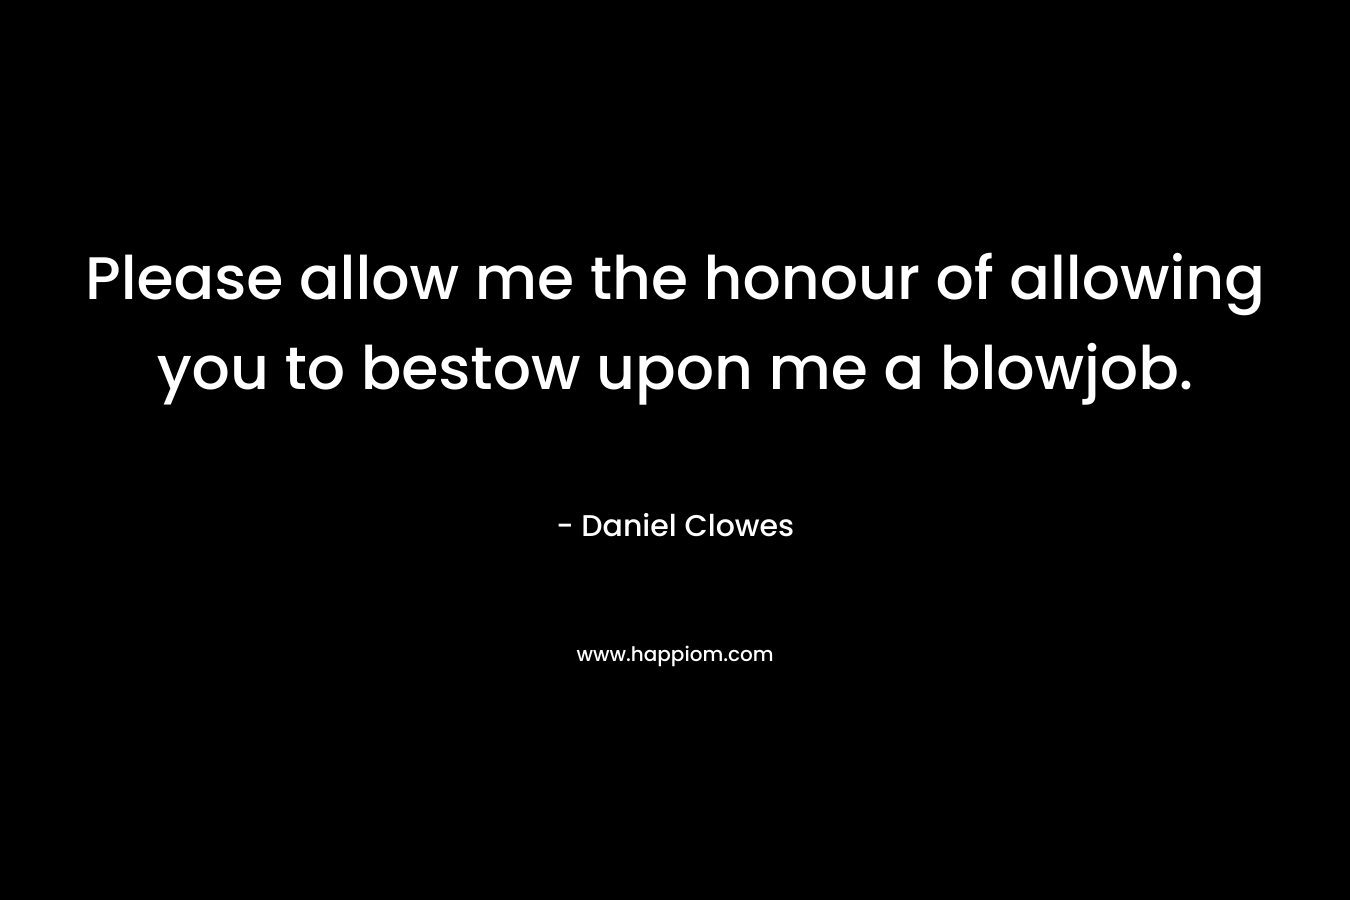 Please allow me the honour of allowing you to bestow upon me a blowjob. – Daniel Clowes